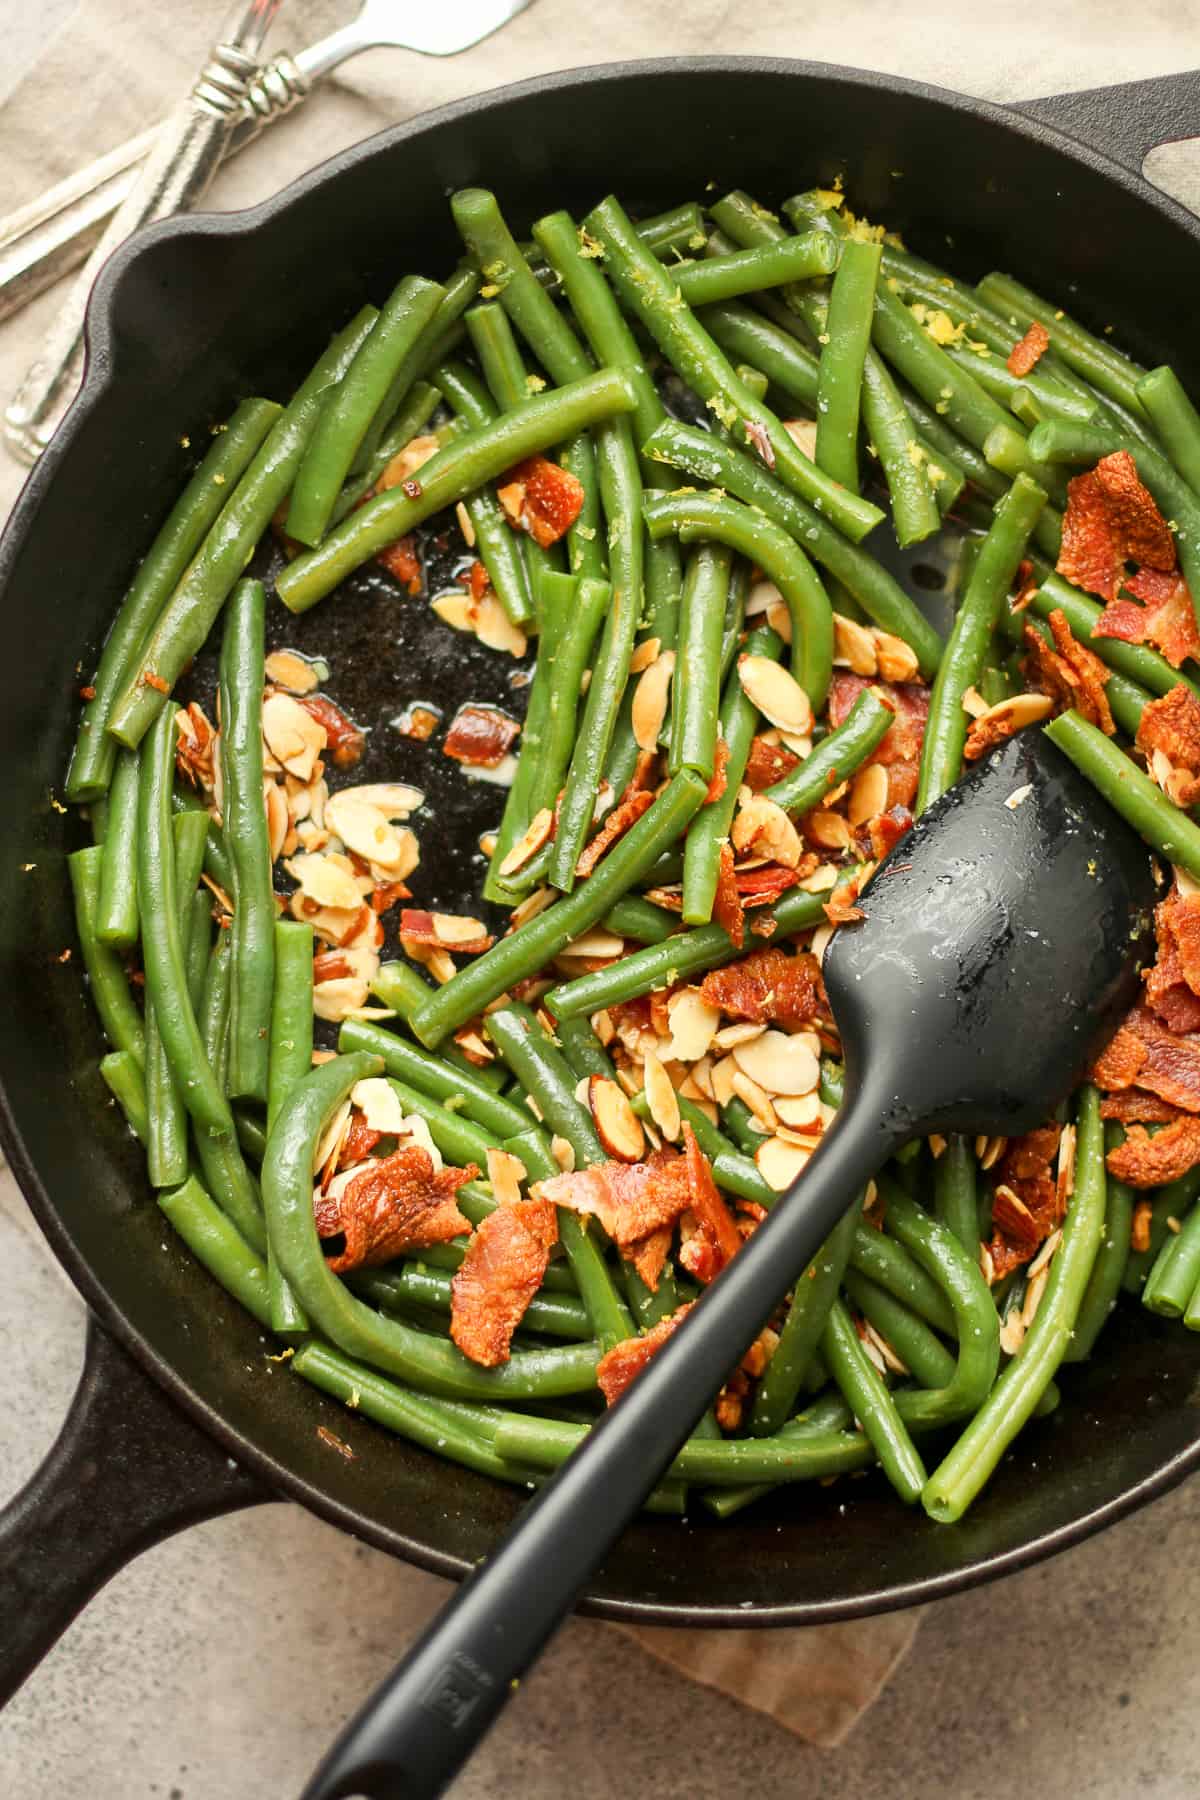 A skillet of the green beans, bacon, and sautéed almonds.